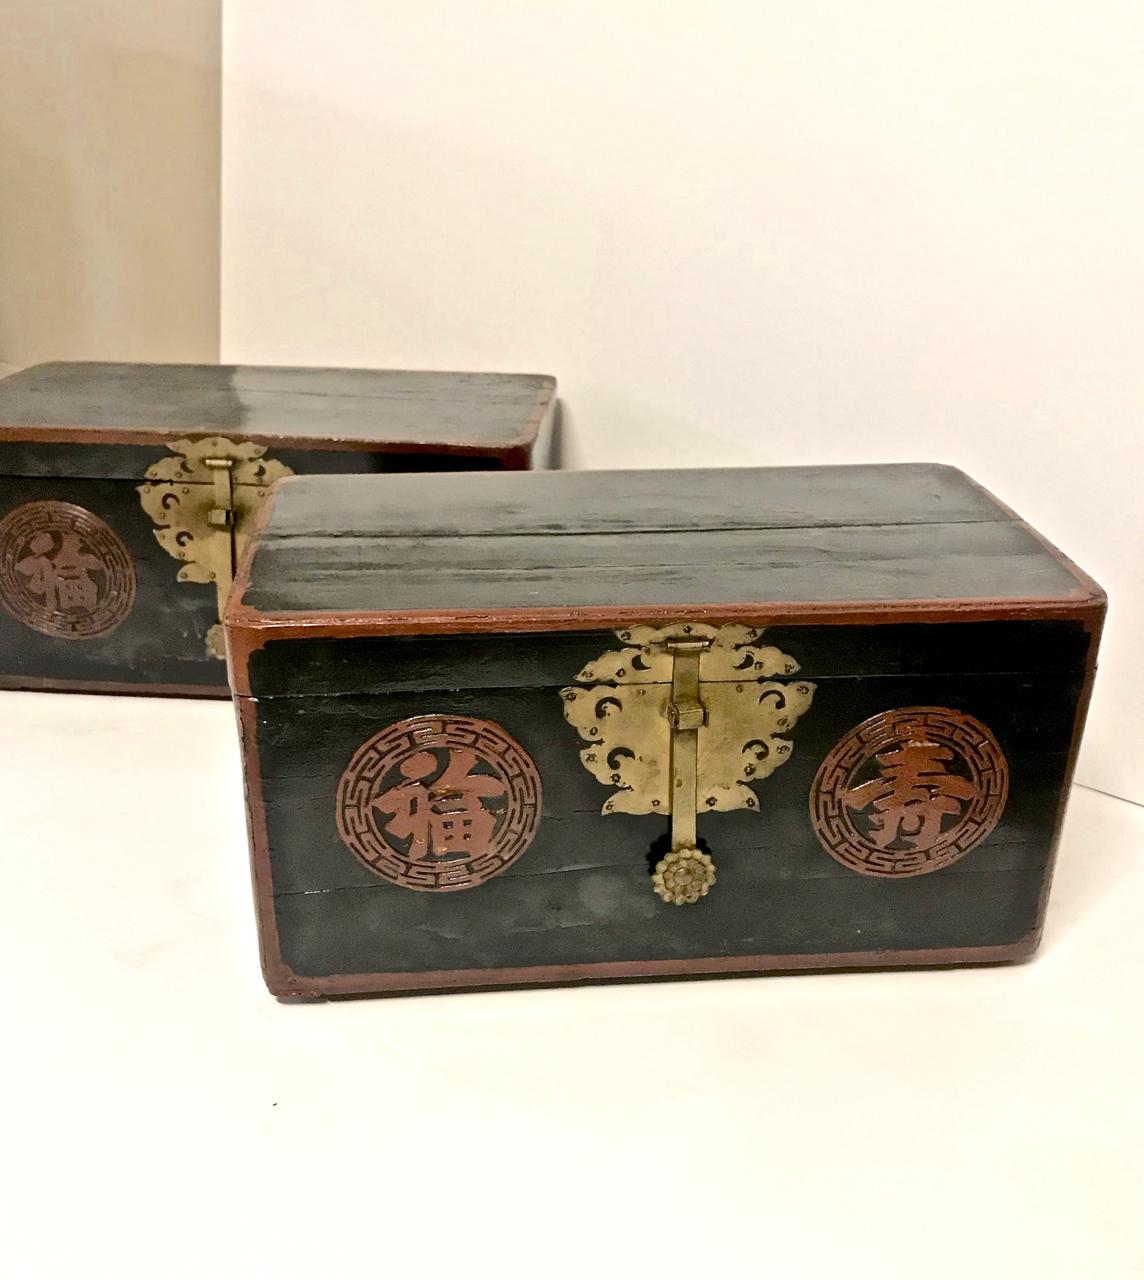 Chinoiserie Pair of Small Asian Lacquer Boxes or Trunks, Late 19th Century